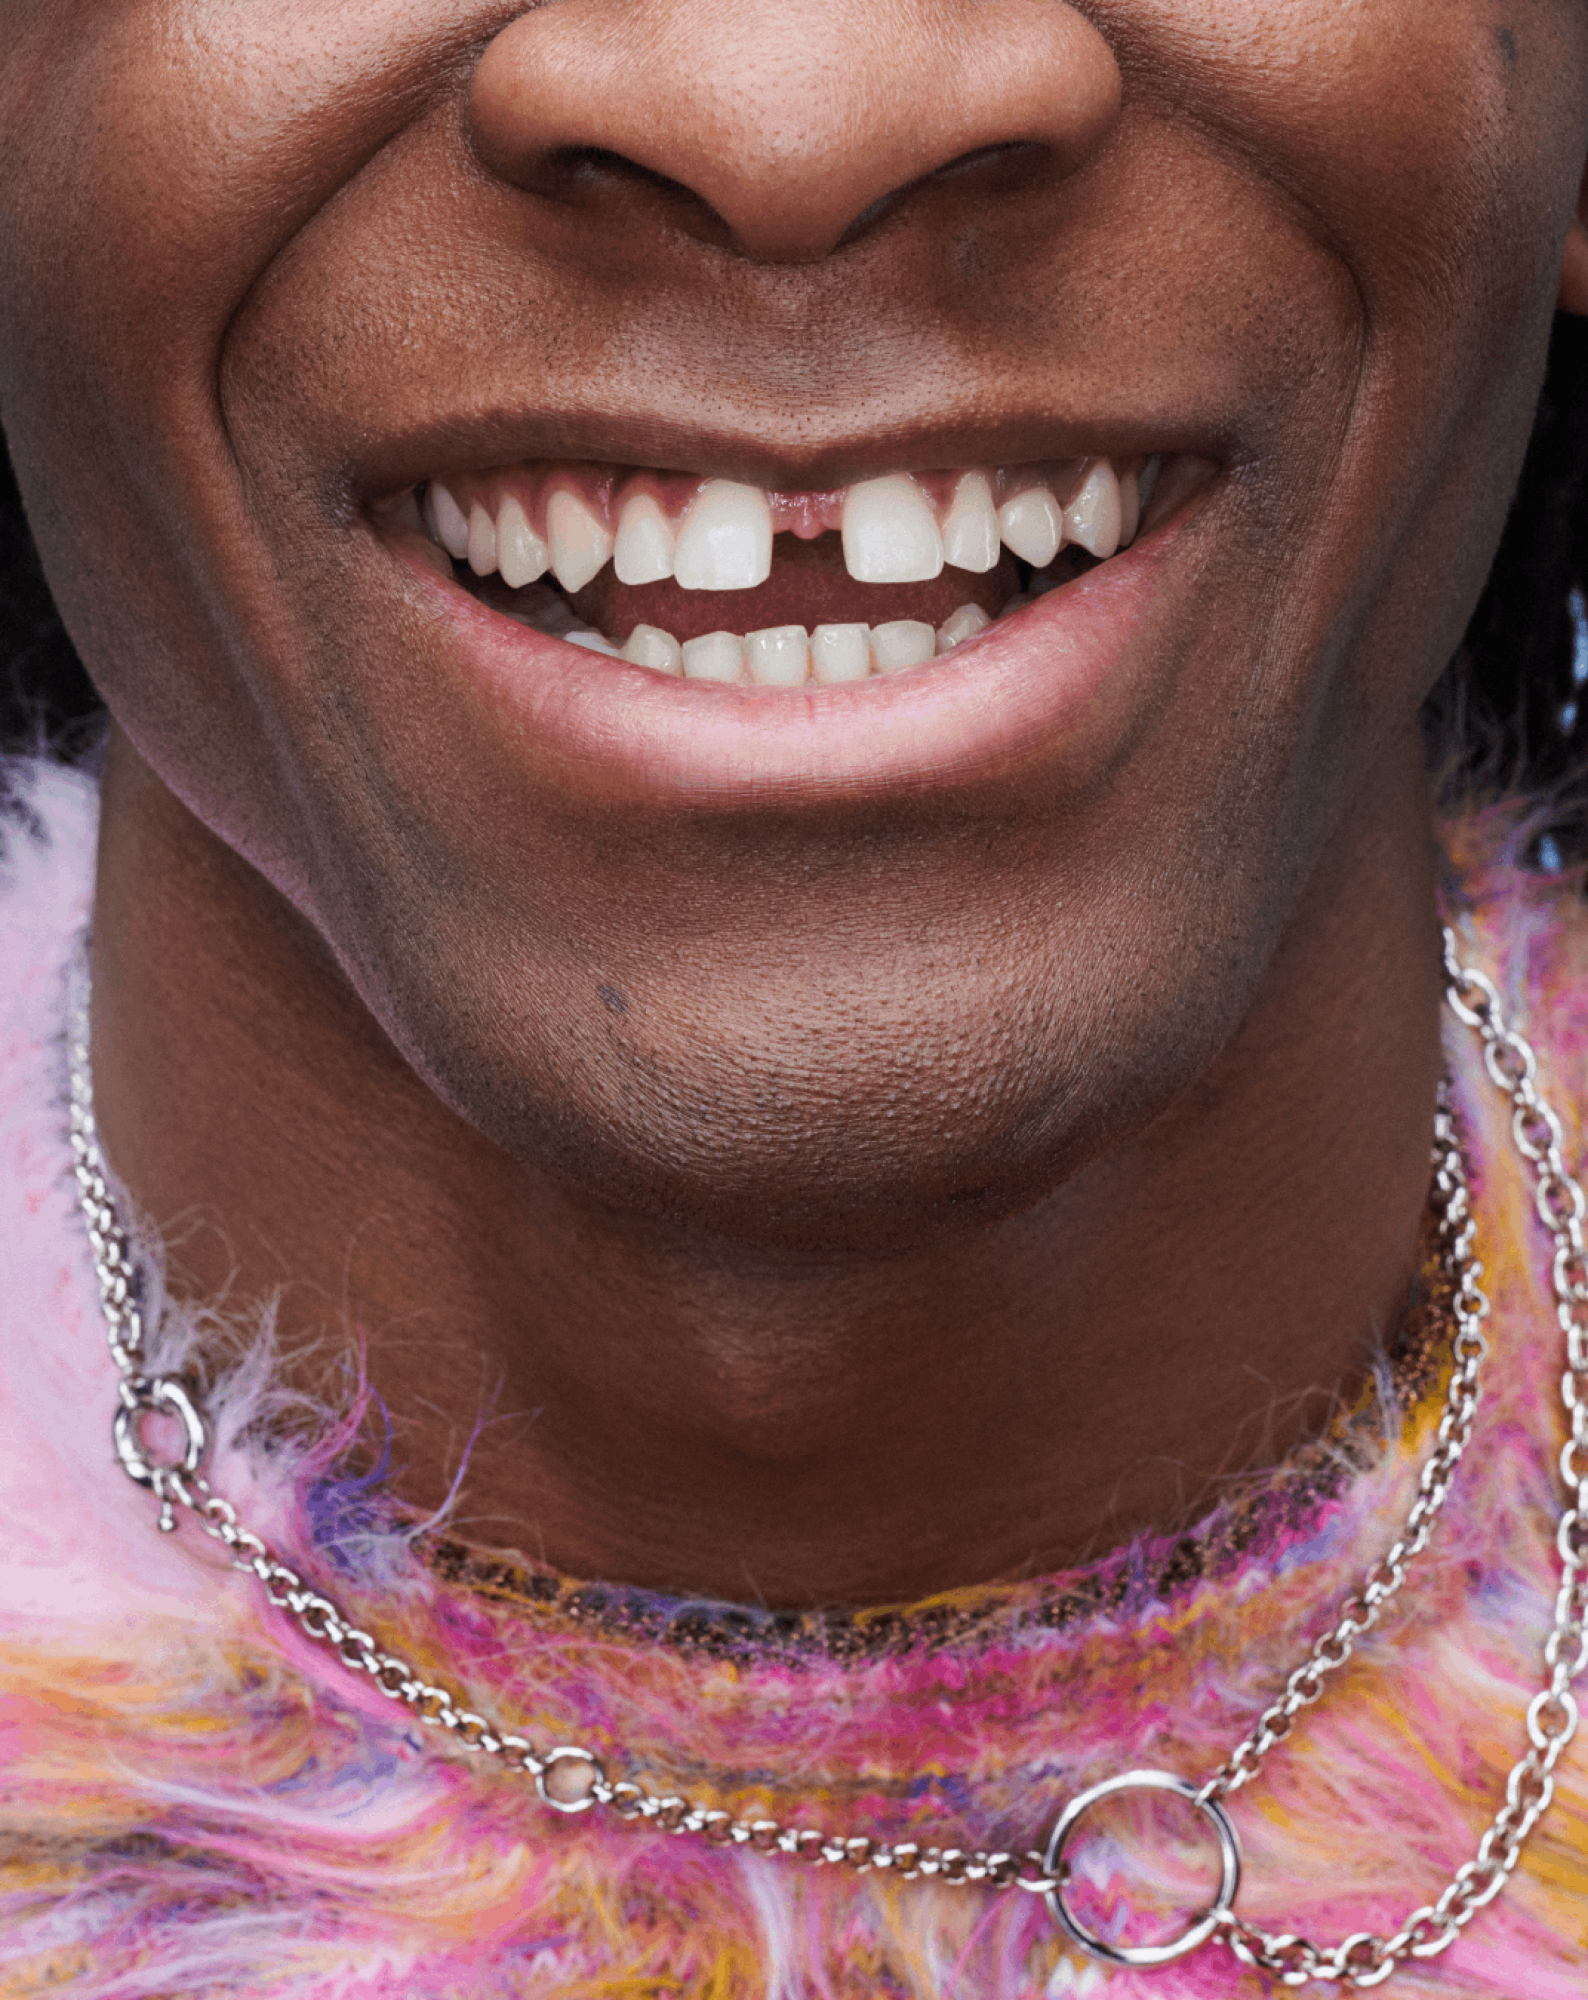 Zoomed in image of a smiling person